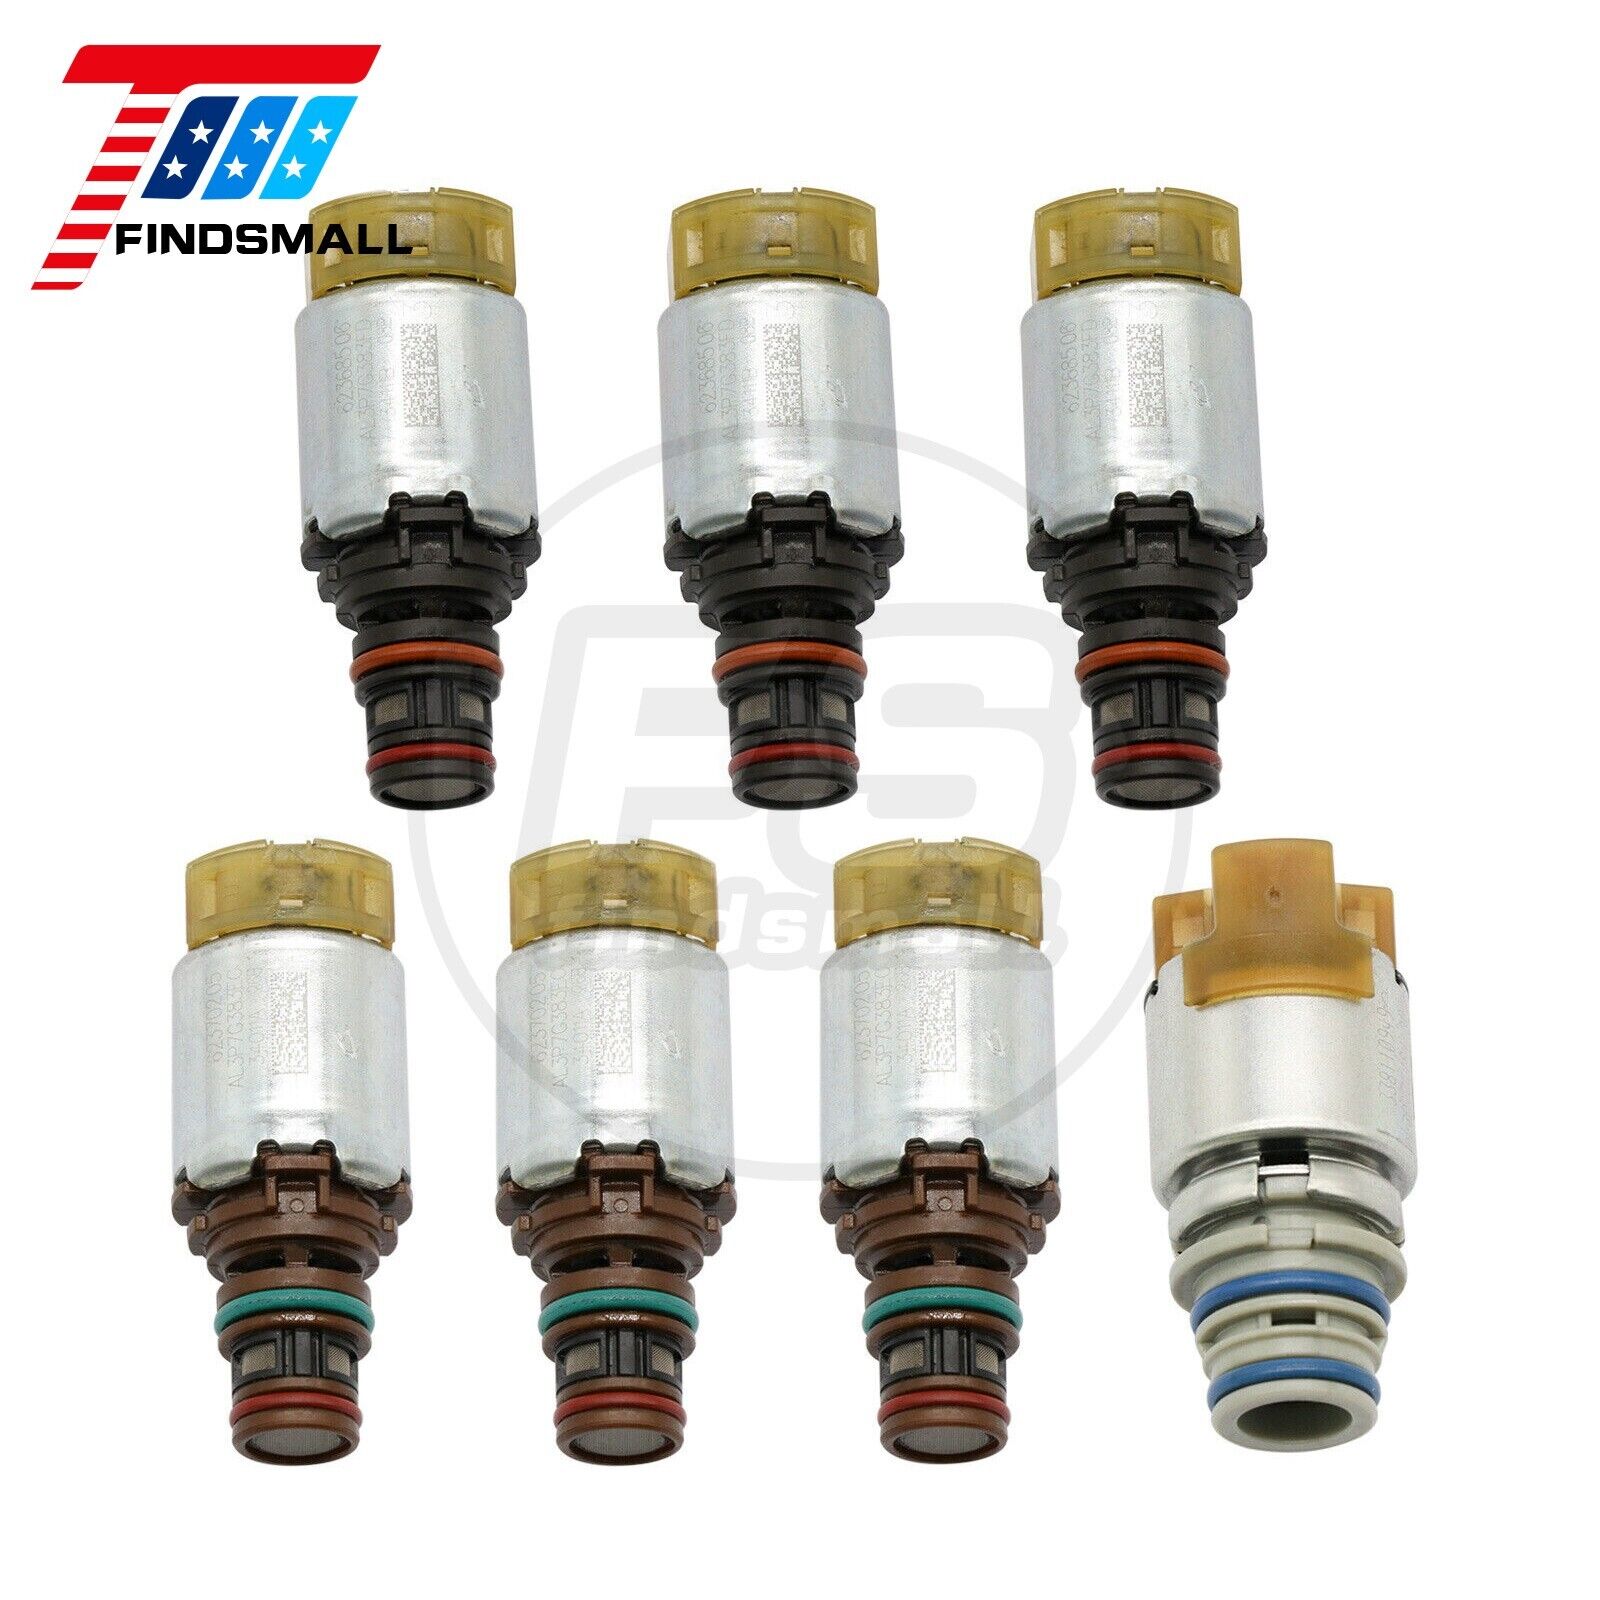 Transmission Solenoid Kit 7Pcs For 09-up FORD Fusion Escape Mariner Tribute 6F35